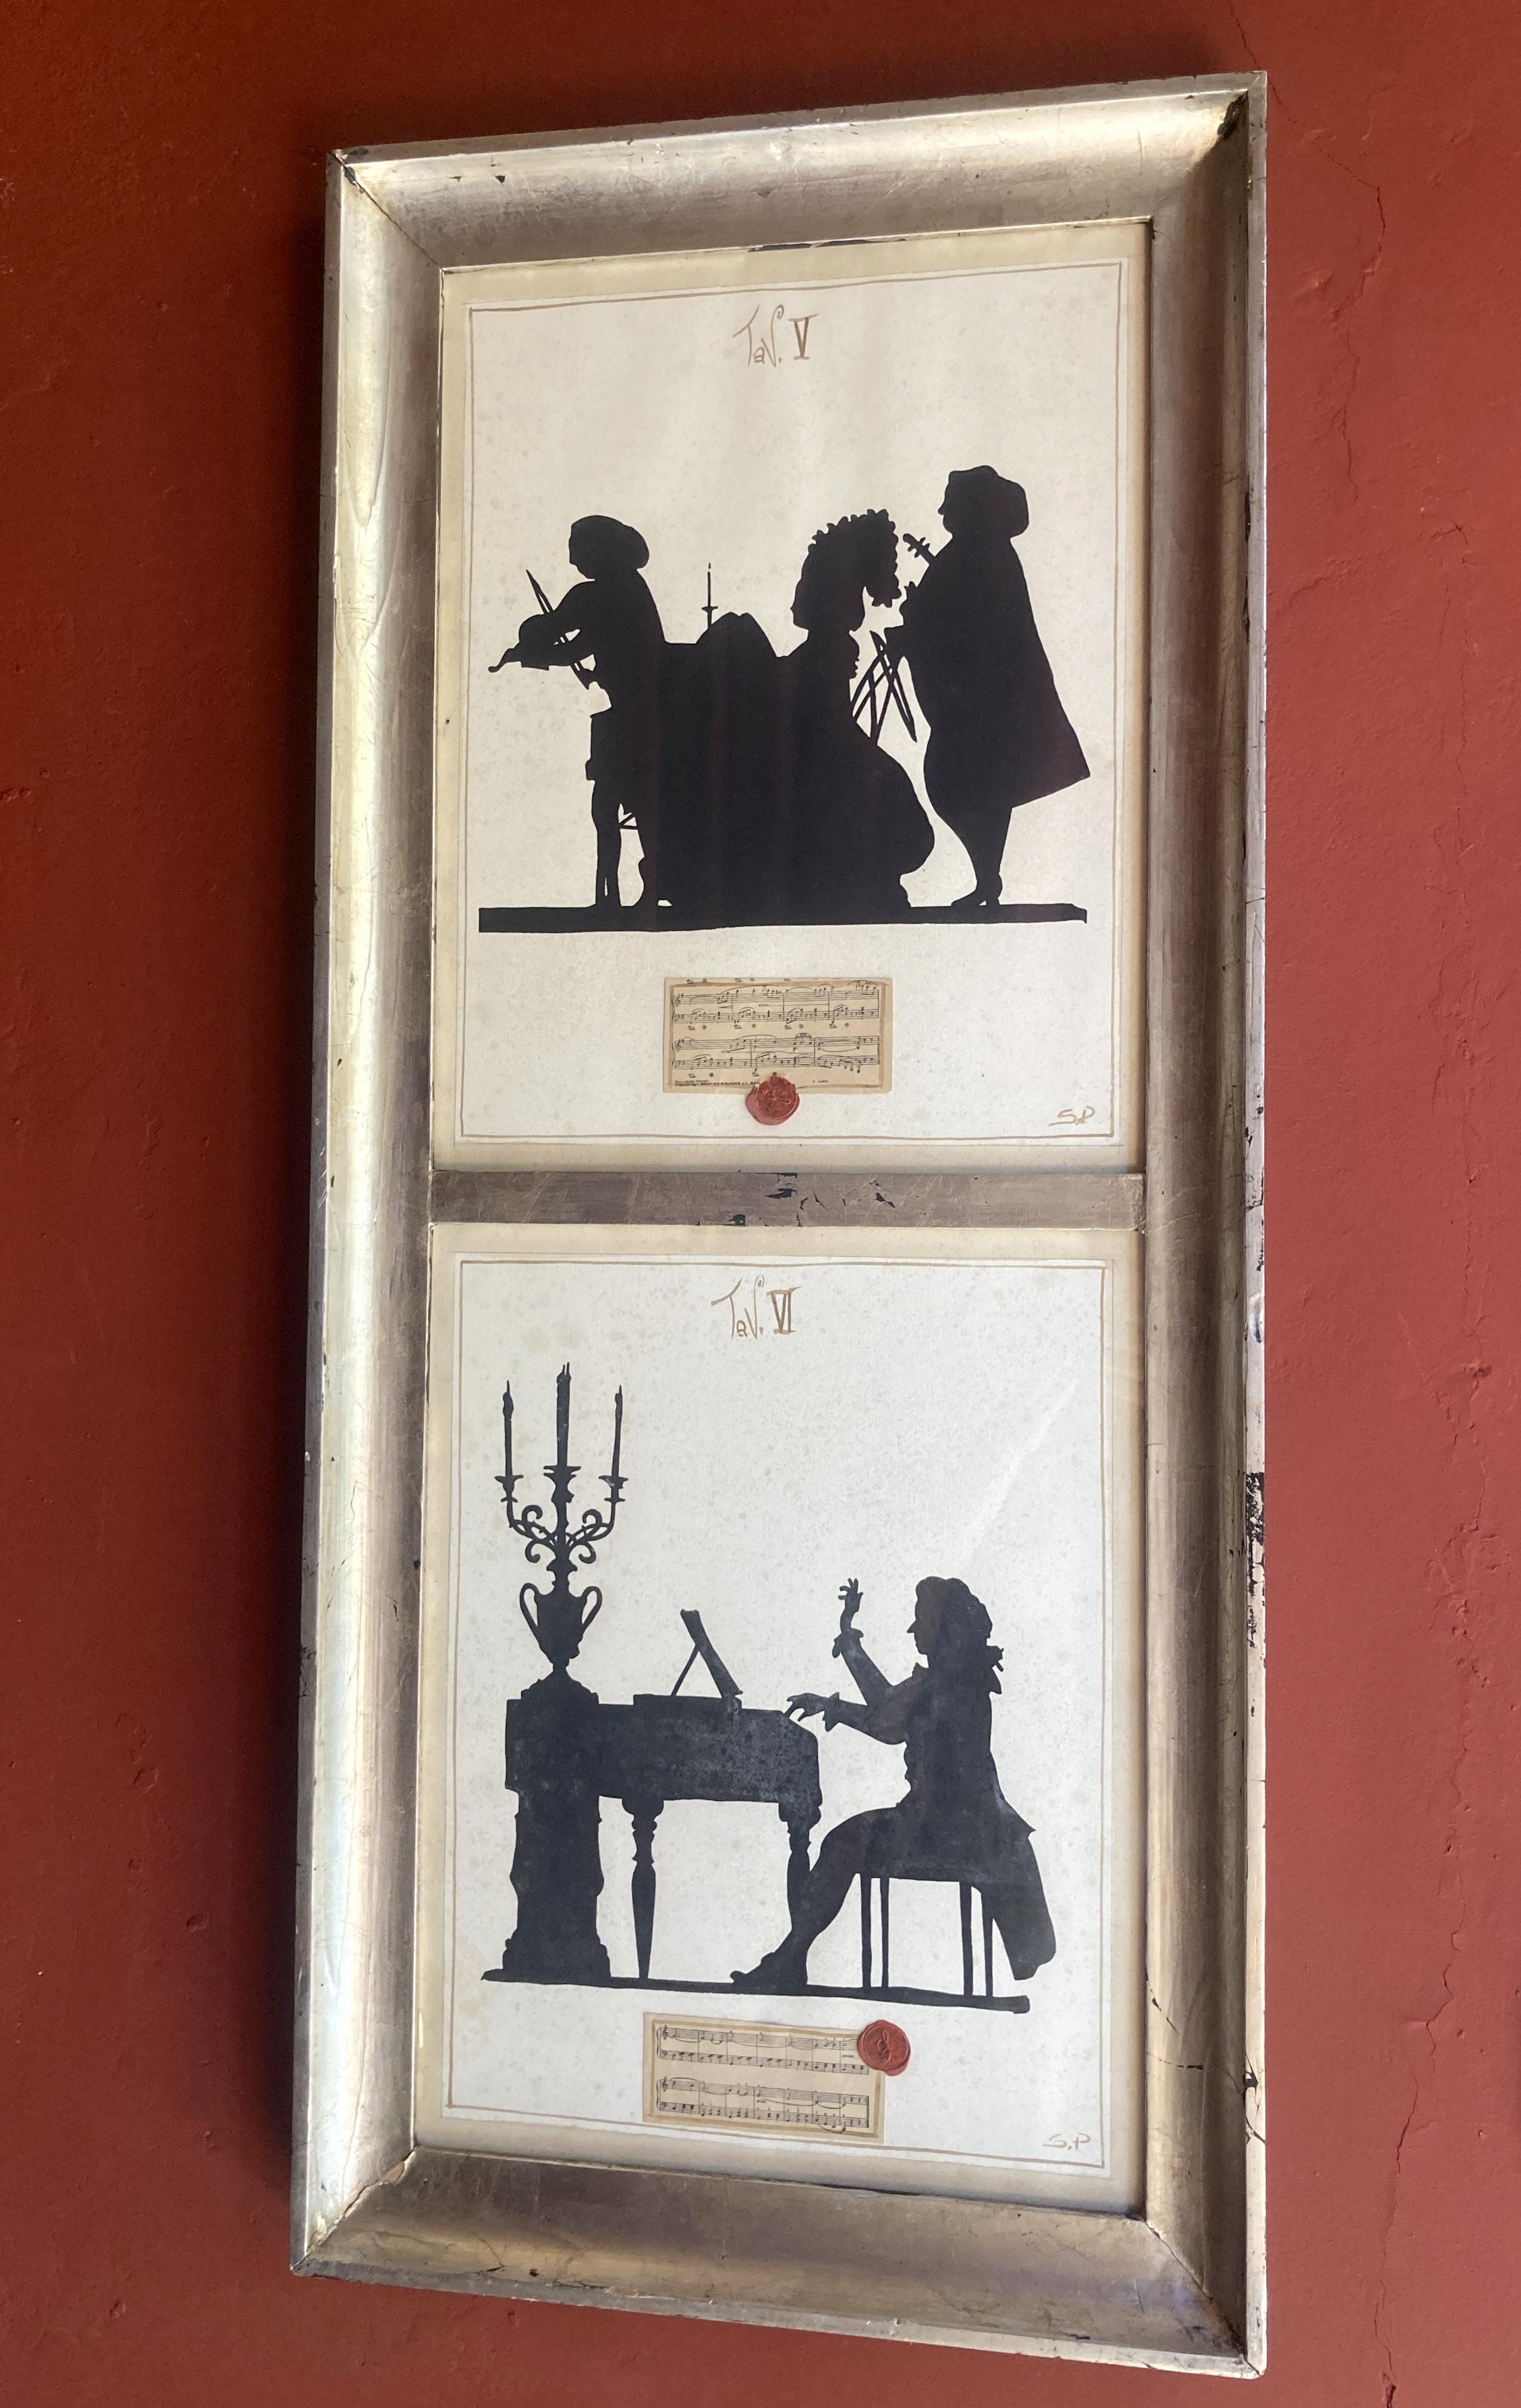 Two very pleasant musical themed silhouettes mixed media paintings. These lovely drawings are made of ink and watercolor on paper enriched by a musical score fixed with a red lacquer wax mold. One figure represents a string trio, the other a pianist